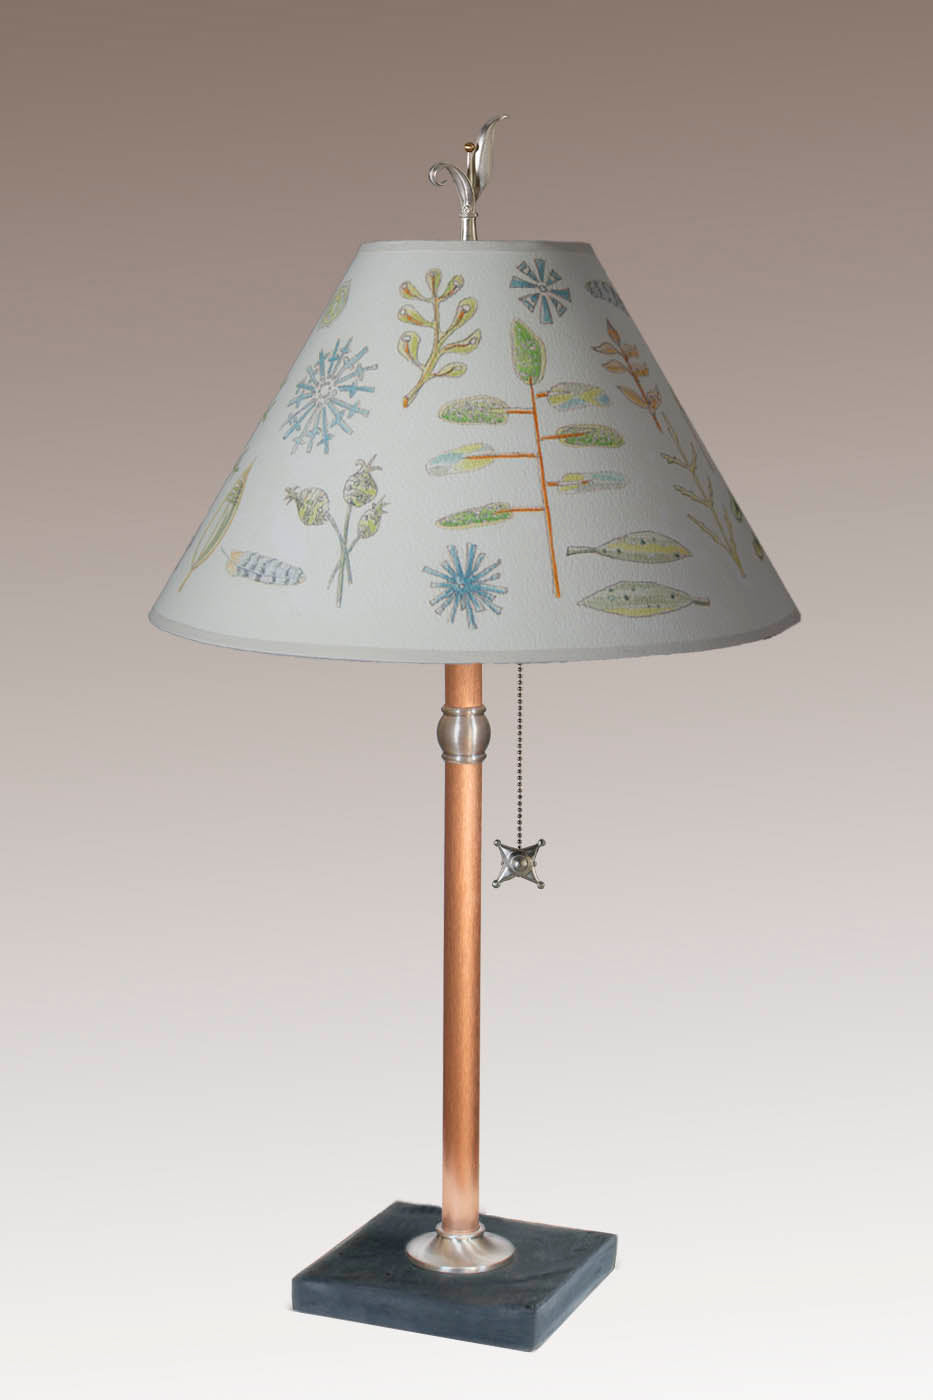 Copper Table Lamp with Medium Conical Shade in Field Chart